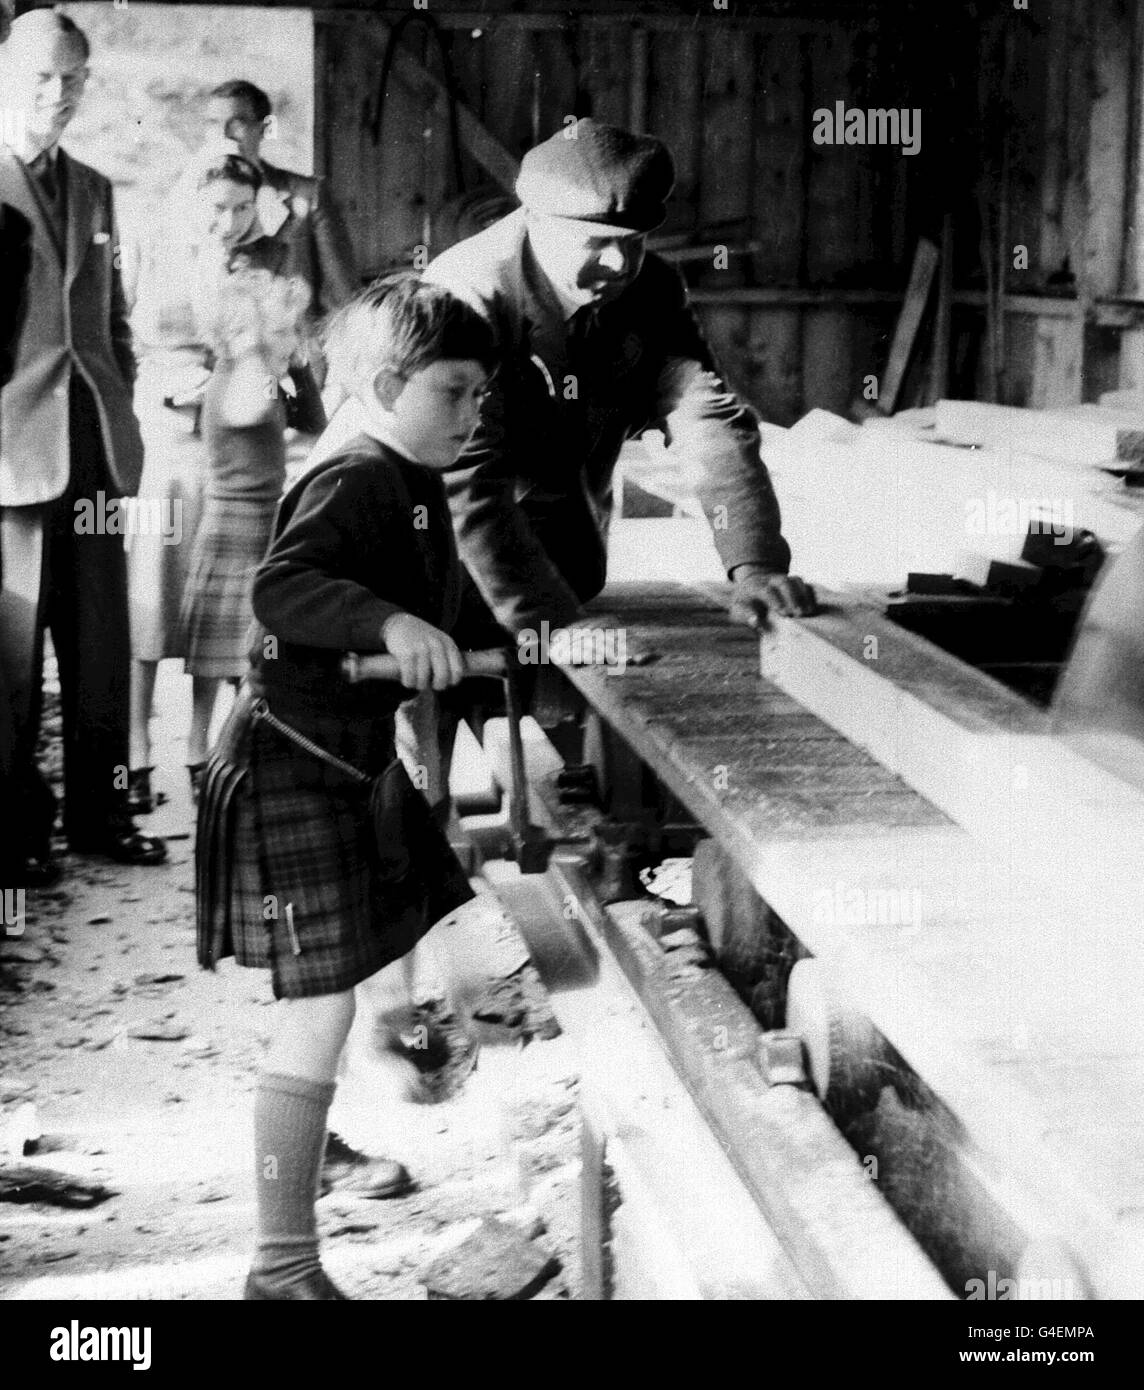 Eight year old Prince Charles tries his hand at the saw-mill when Royal family visited the forestry plantation on the Balmoral Castle estate, Balmoral, Aberdeenshire, Scotland. The Duke of Edinburgh, Queen Elizabeth II and Princess Anne watch the young prince from the background. Stock Photo